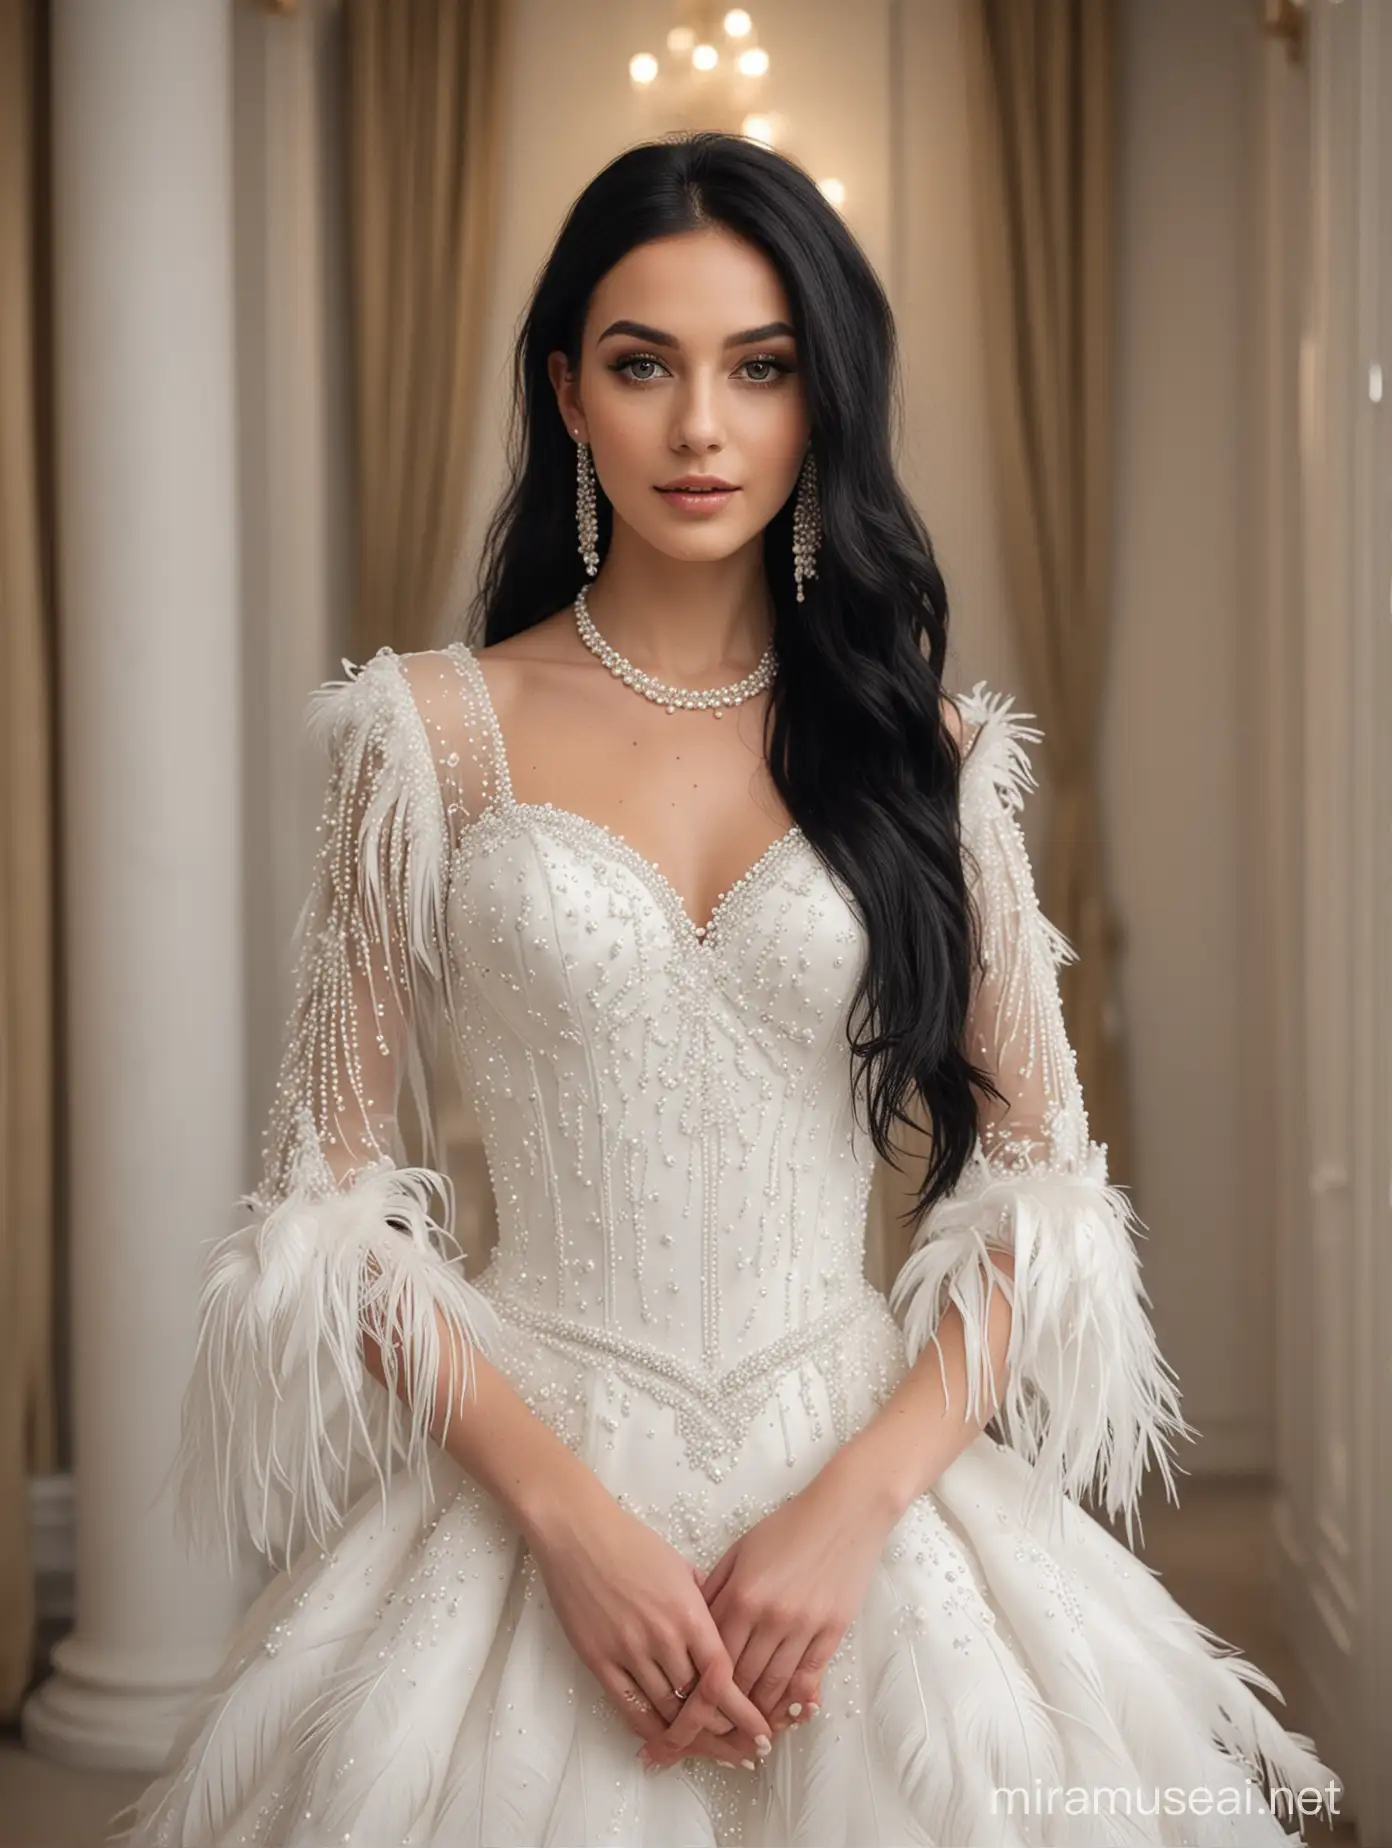 Elegant Bride with Exquisite Pearls and Feathers Wedding Dress